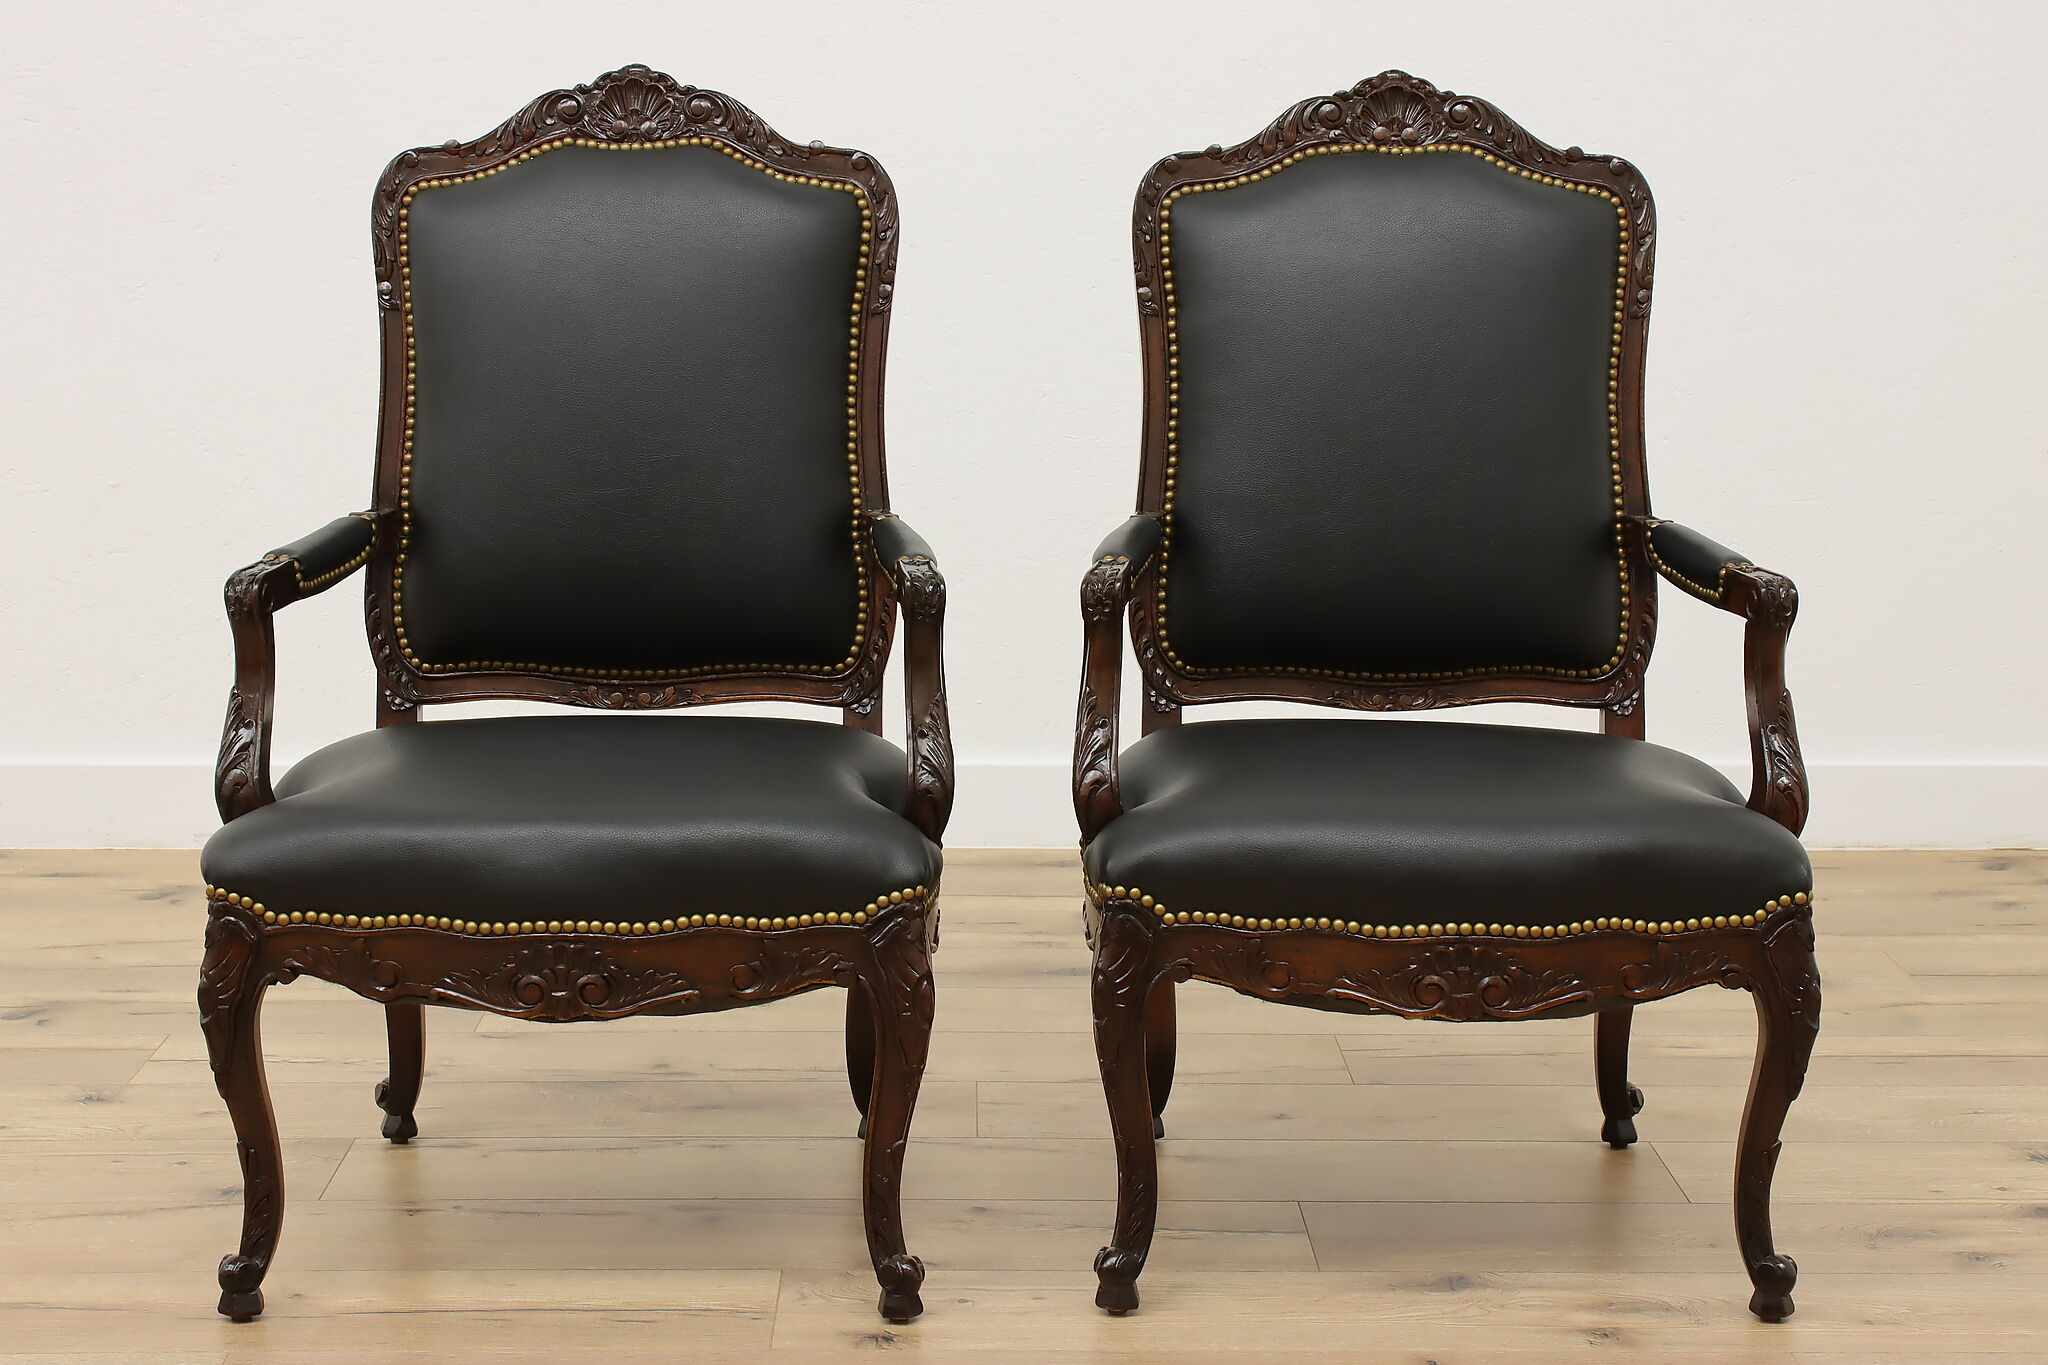 Pair of French Design Armchairs, Faux Leather Upholstery